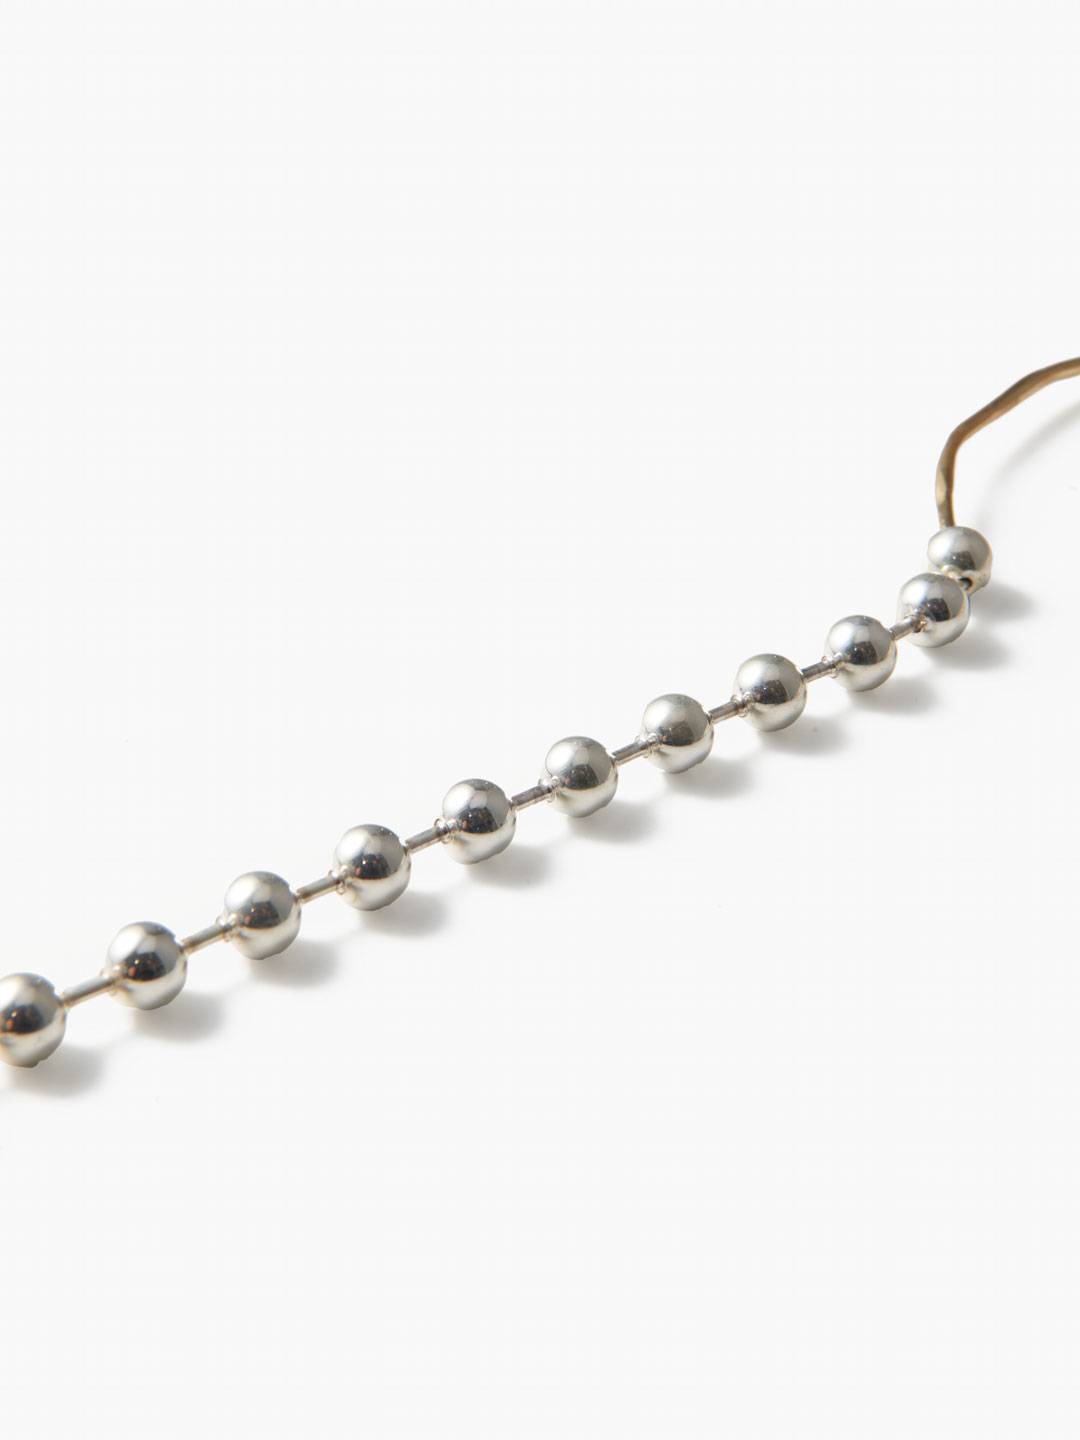 Wireball Necklace - Silver/Gold